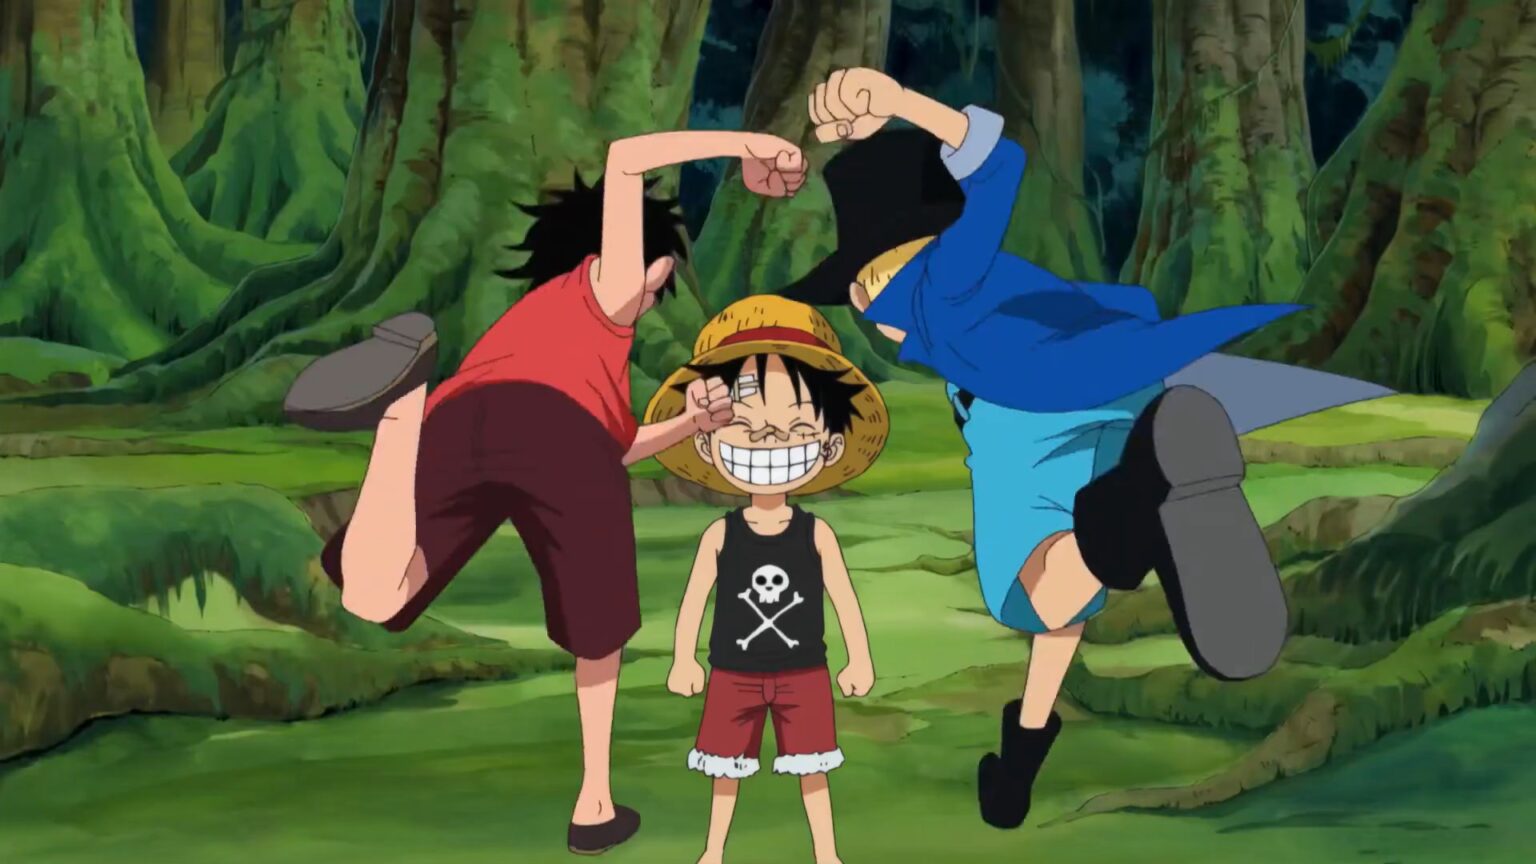 Luffy gets hit by his older brothers Sabo and Ace in Episode 493